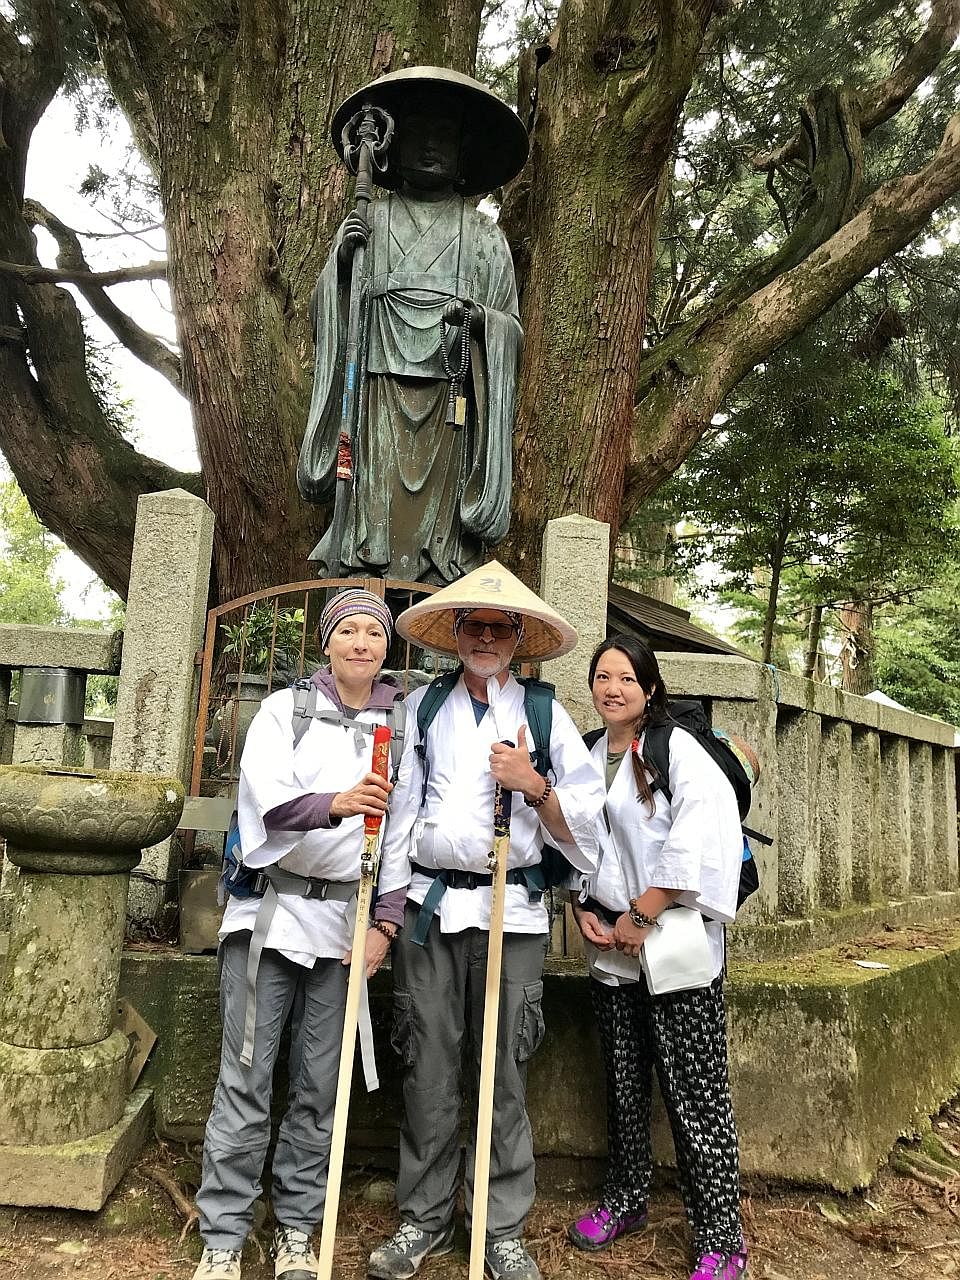 Writer Gary Hayden on the Shikoku pilgrimage with his wife Wendy (left) and their friend Lorraine. The pilgrimage is often done in four stages and the writer has completed the first one and plans to complete the remaining stages over the next twelve 